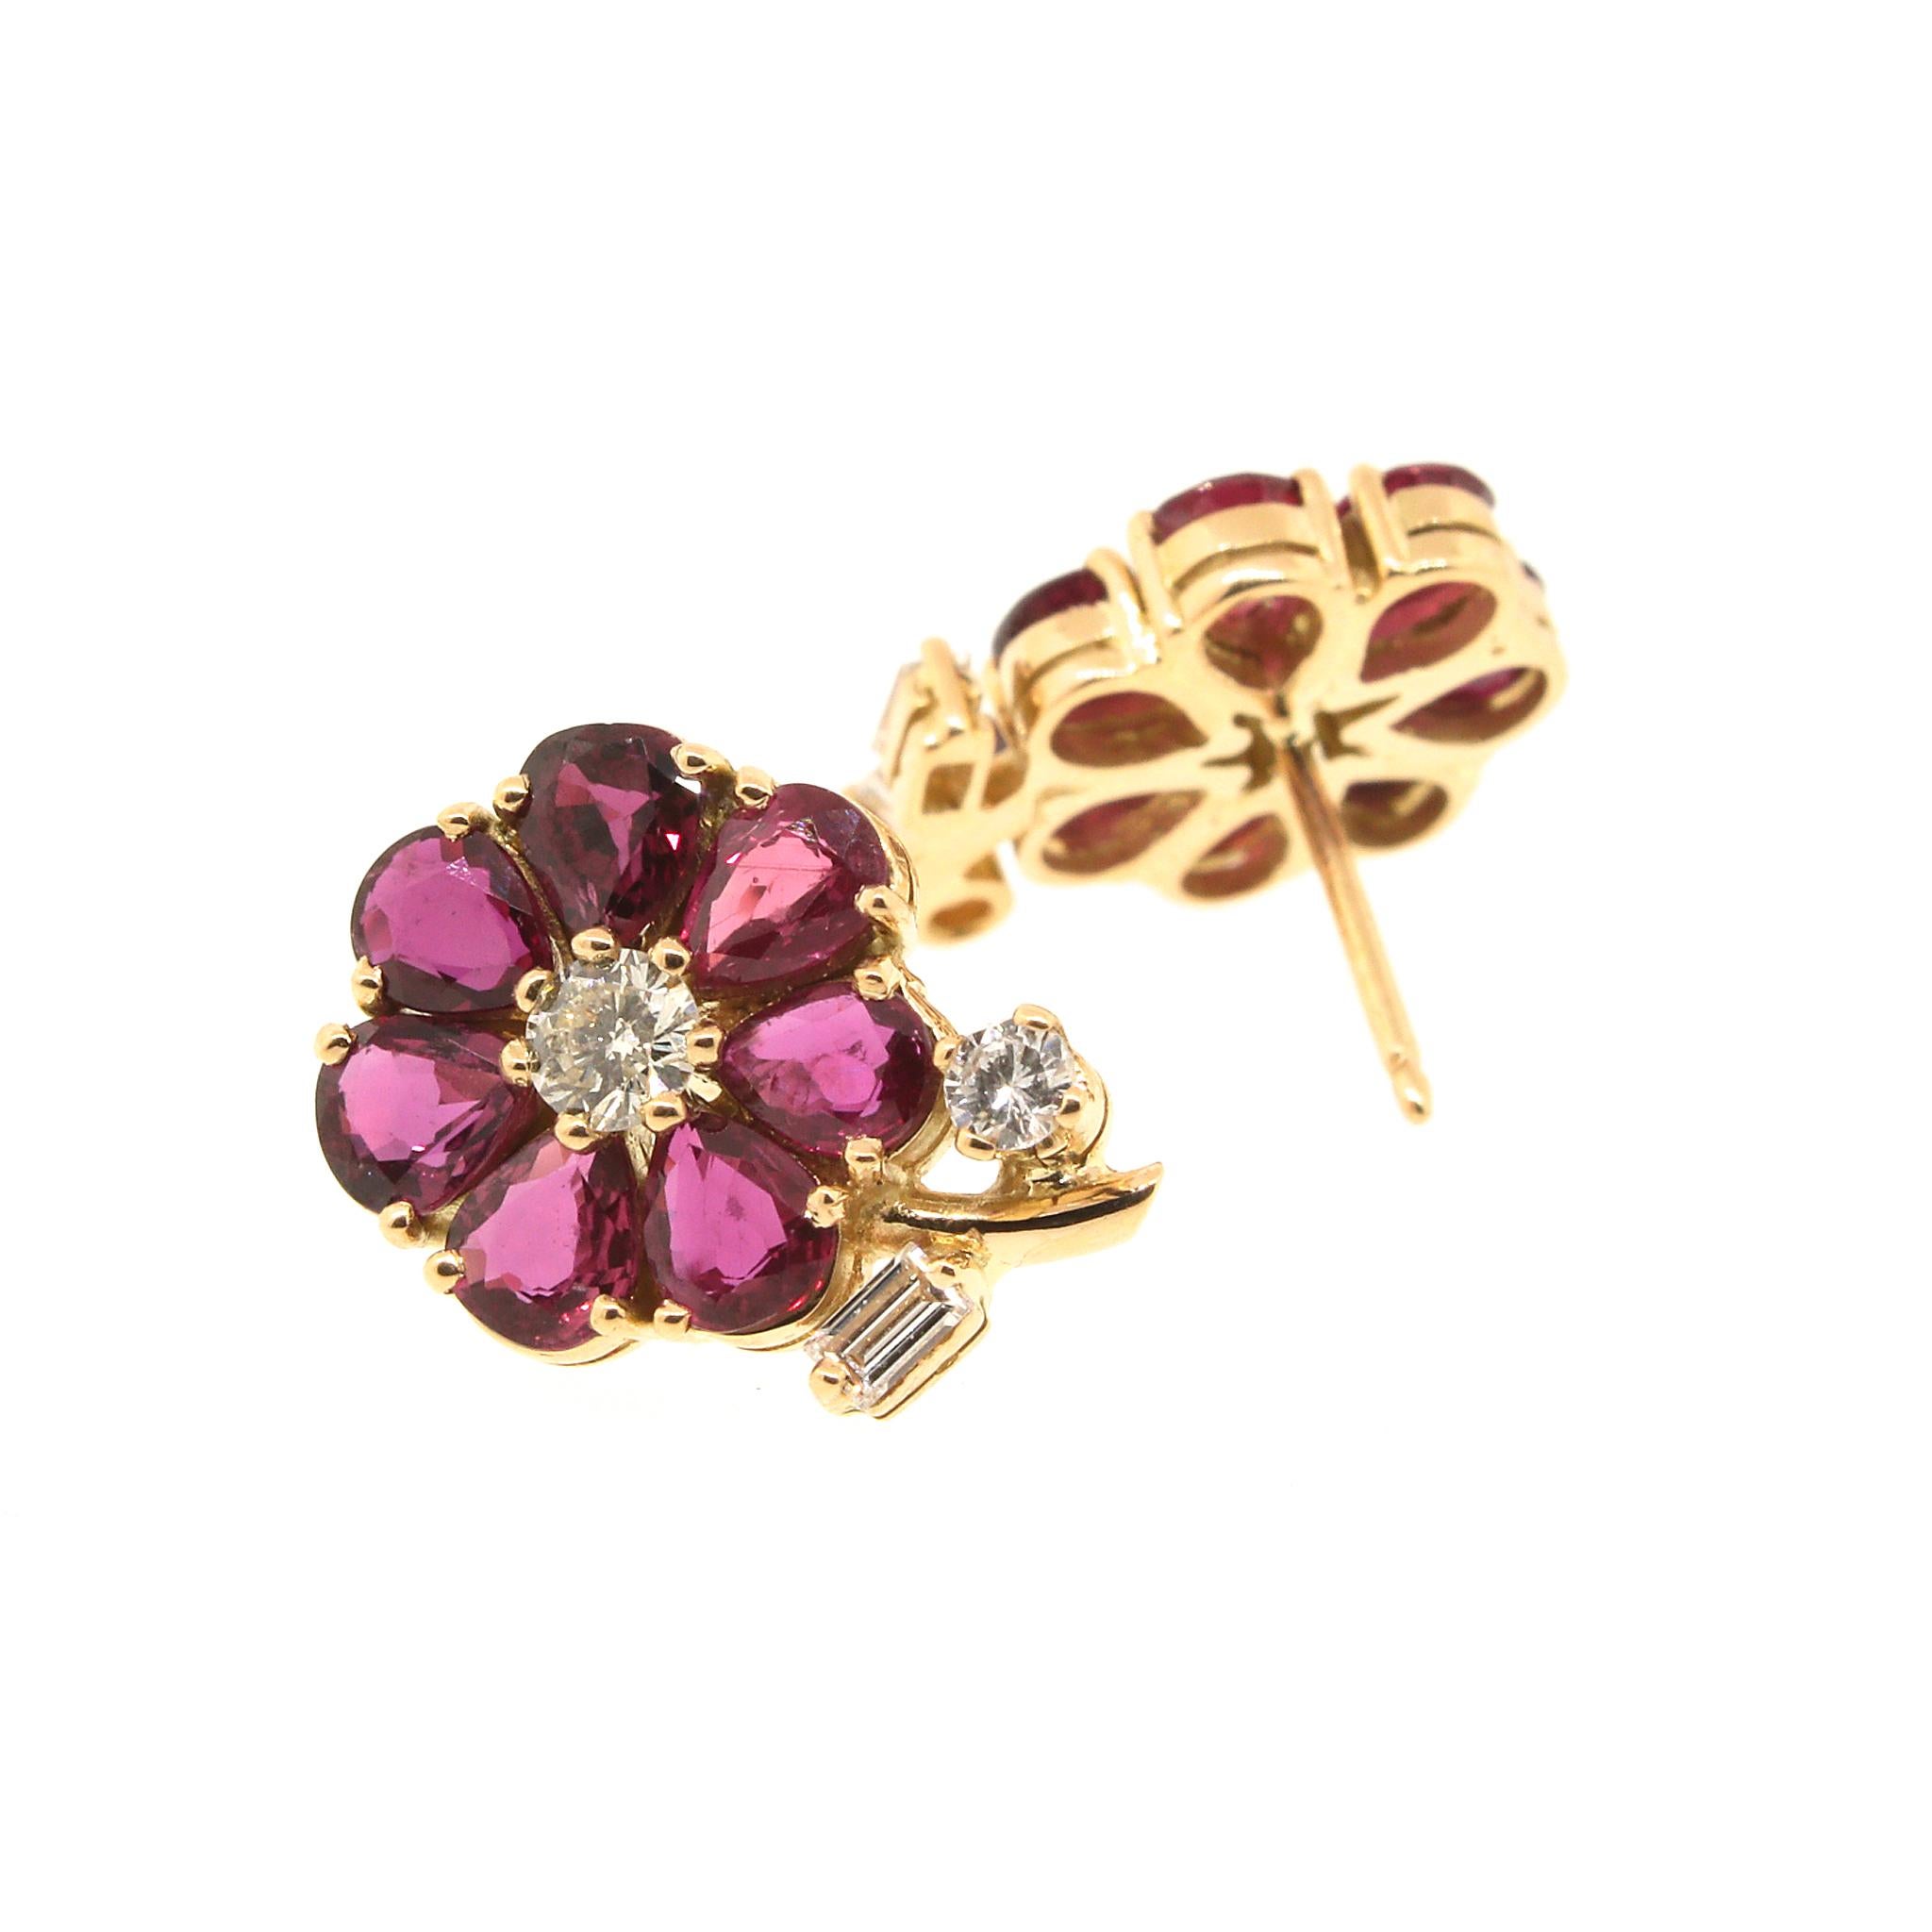 18 kt Yellow Gold
Ruby: 2.80 ct twd
Diamond: 0.40 ct twd
Total Weight: 6.5 grams